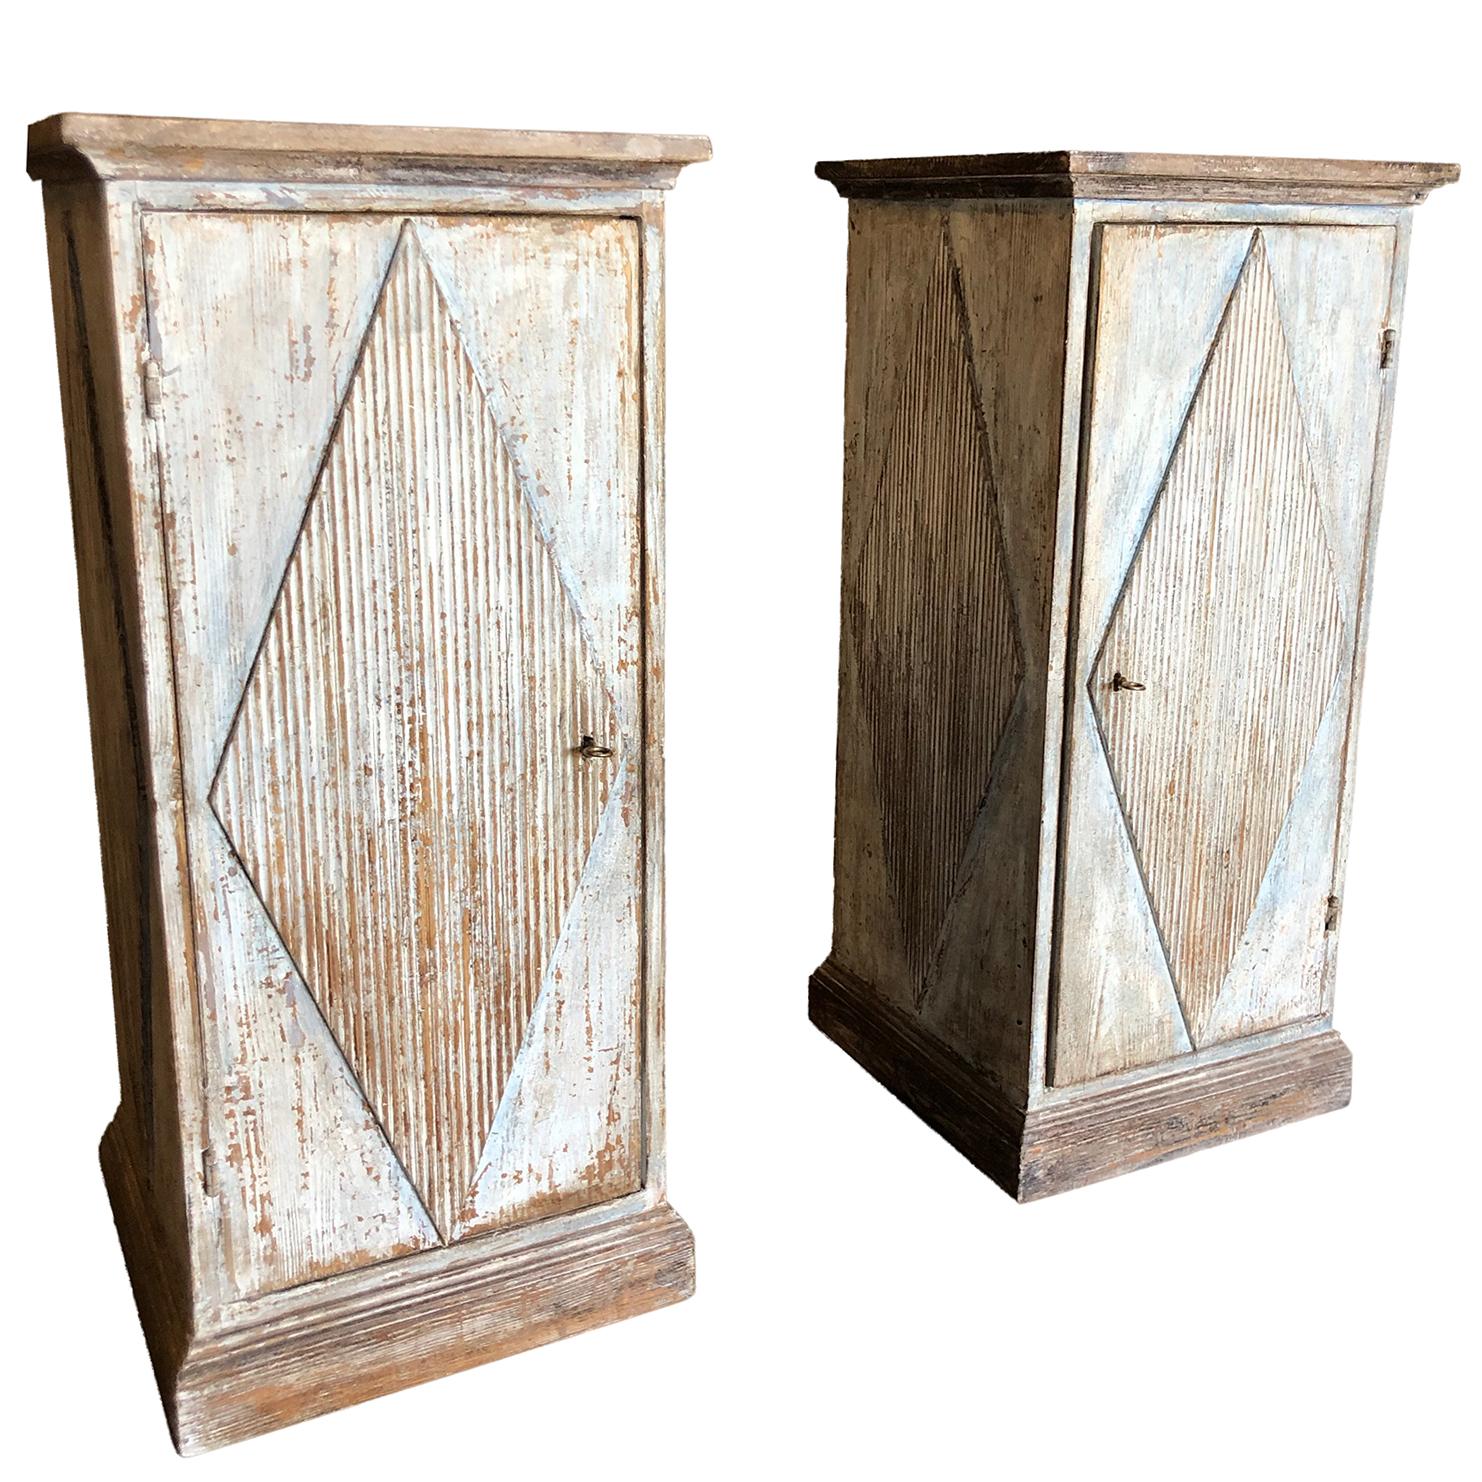 A light-white, antique pair of Swedish Gustavian square pedestals made of hand carved oakwood with raised rhombic decoration on front and sides with chalk painted finish on wood. The front panel opens, key included, in good condition. Wear